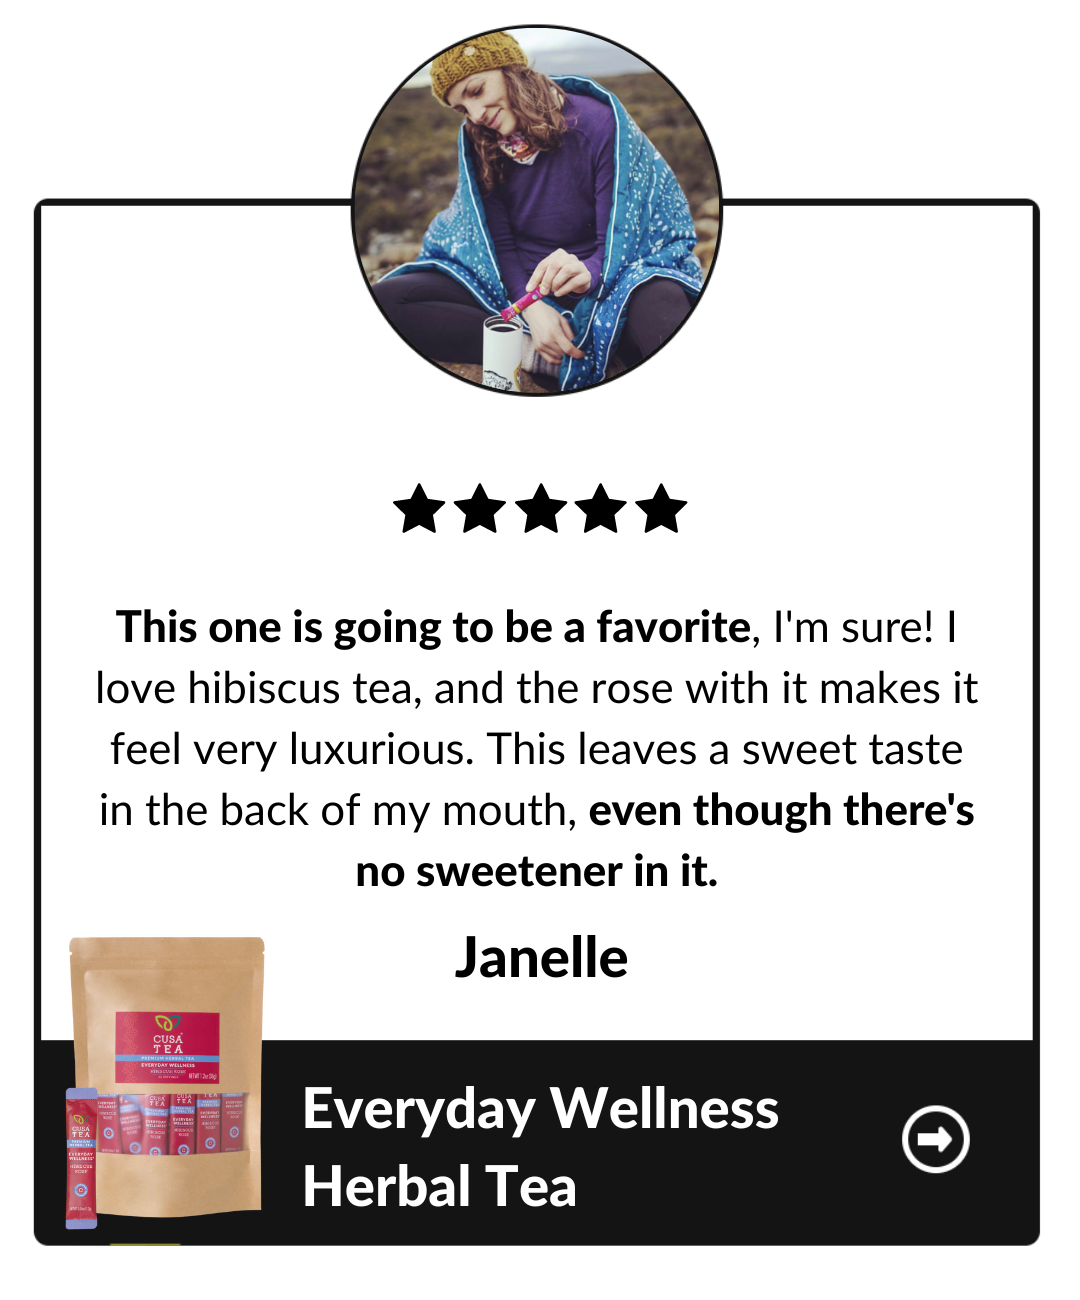 This one is going to be a favorite, I'm sure! I love hibiscus tea, and the rose with it makes it feel very luxurious. This leaves a sweet taste in the back of my mouth, even though there's no sweetener in it. Janelle, Everyday Wellness Herbal Tea testimonial